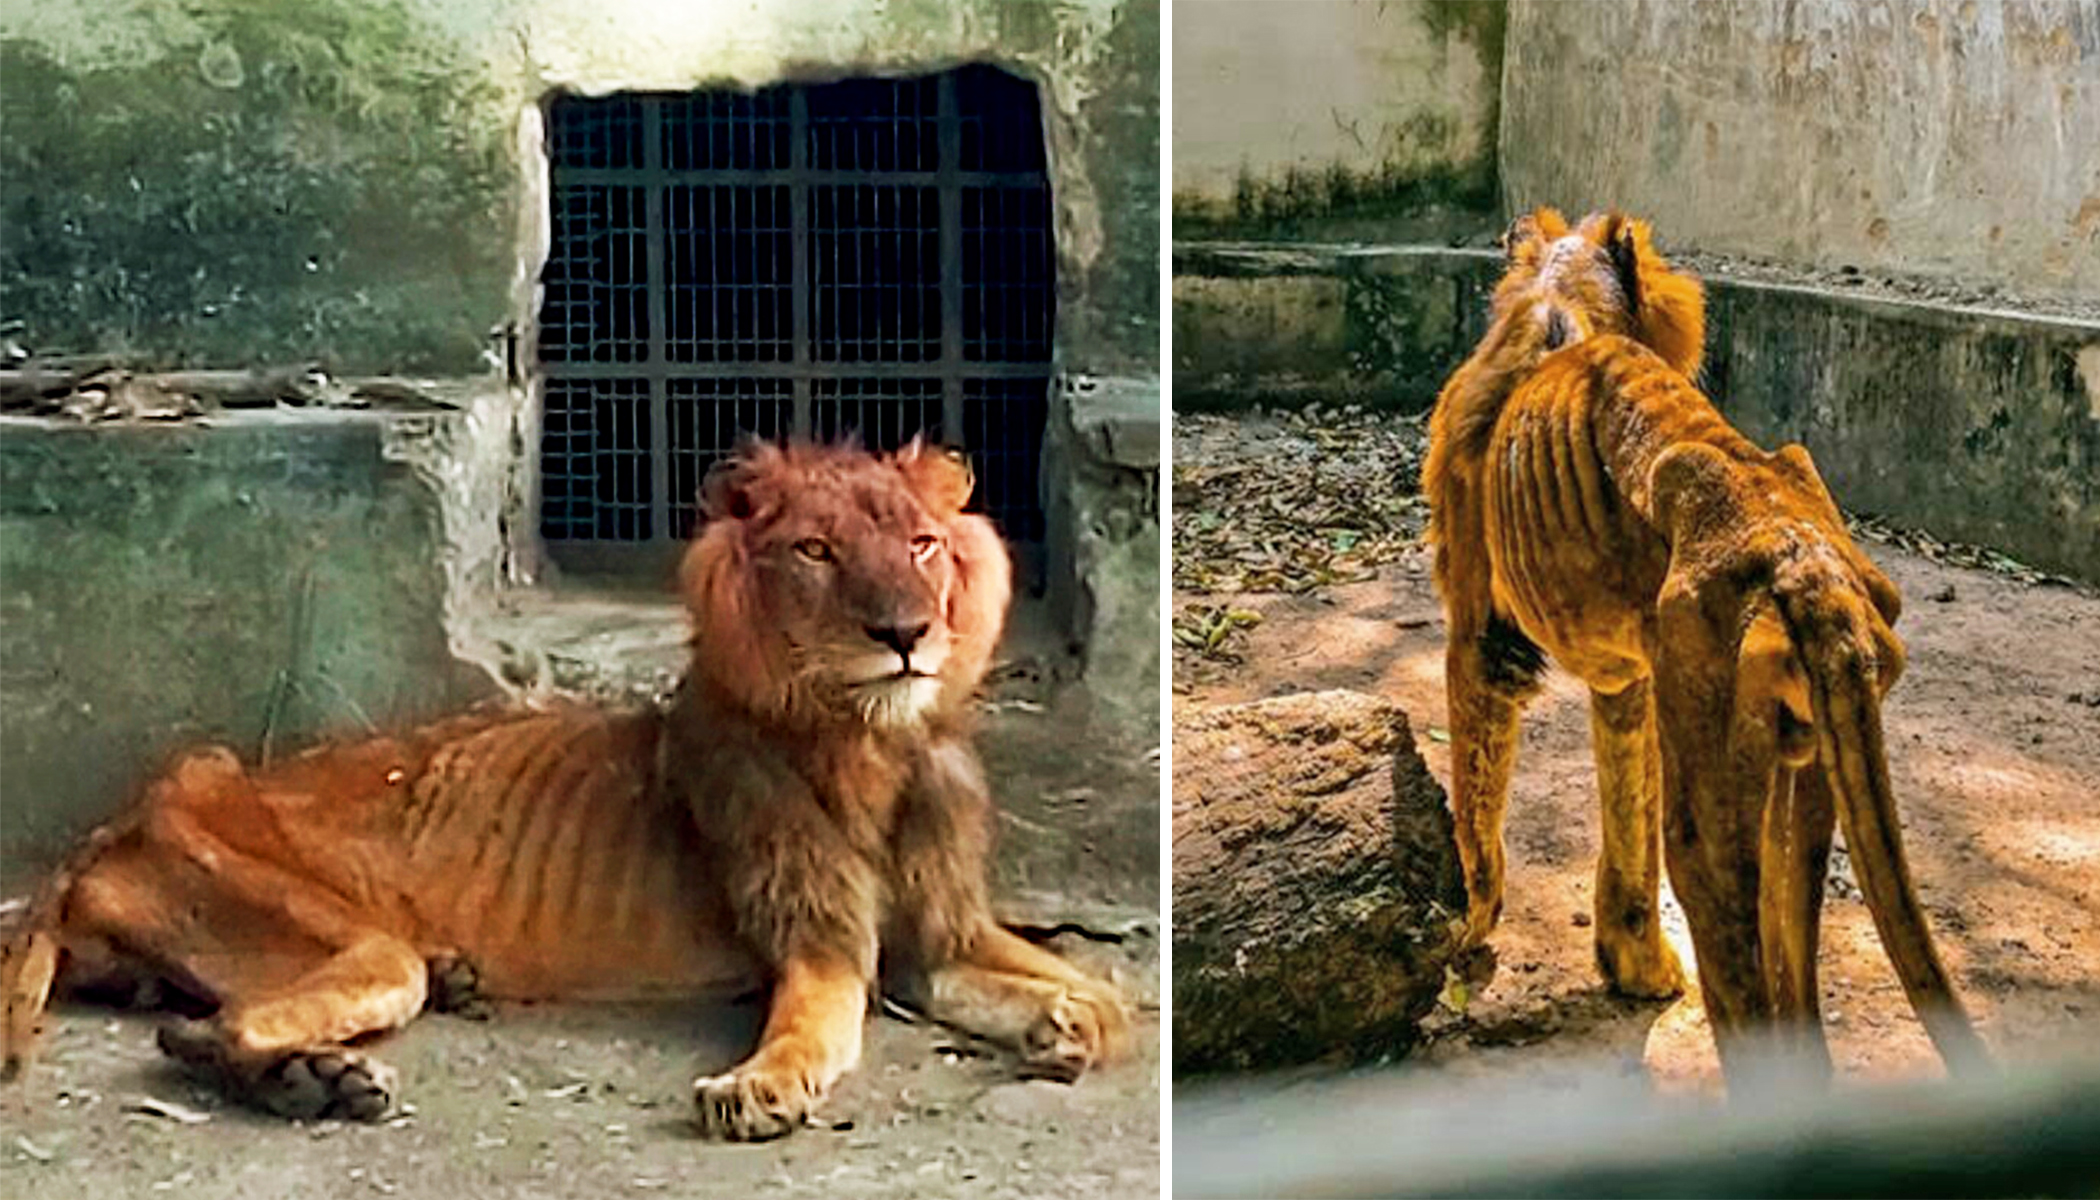 Shocked Visitor Reports Emaciated Lion and Starving Animals at Horrific Nigerian Zoo